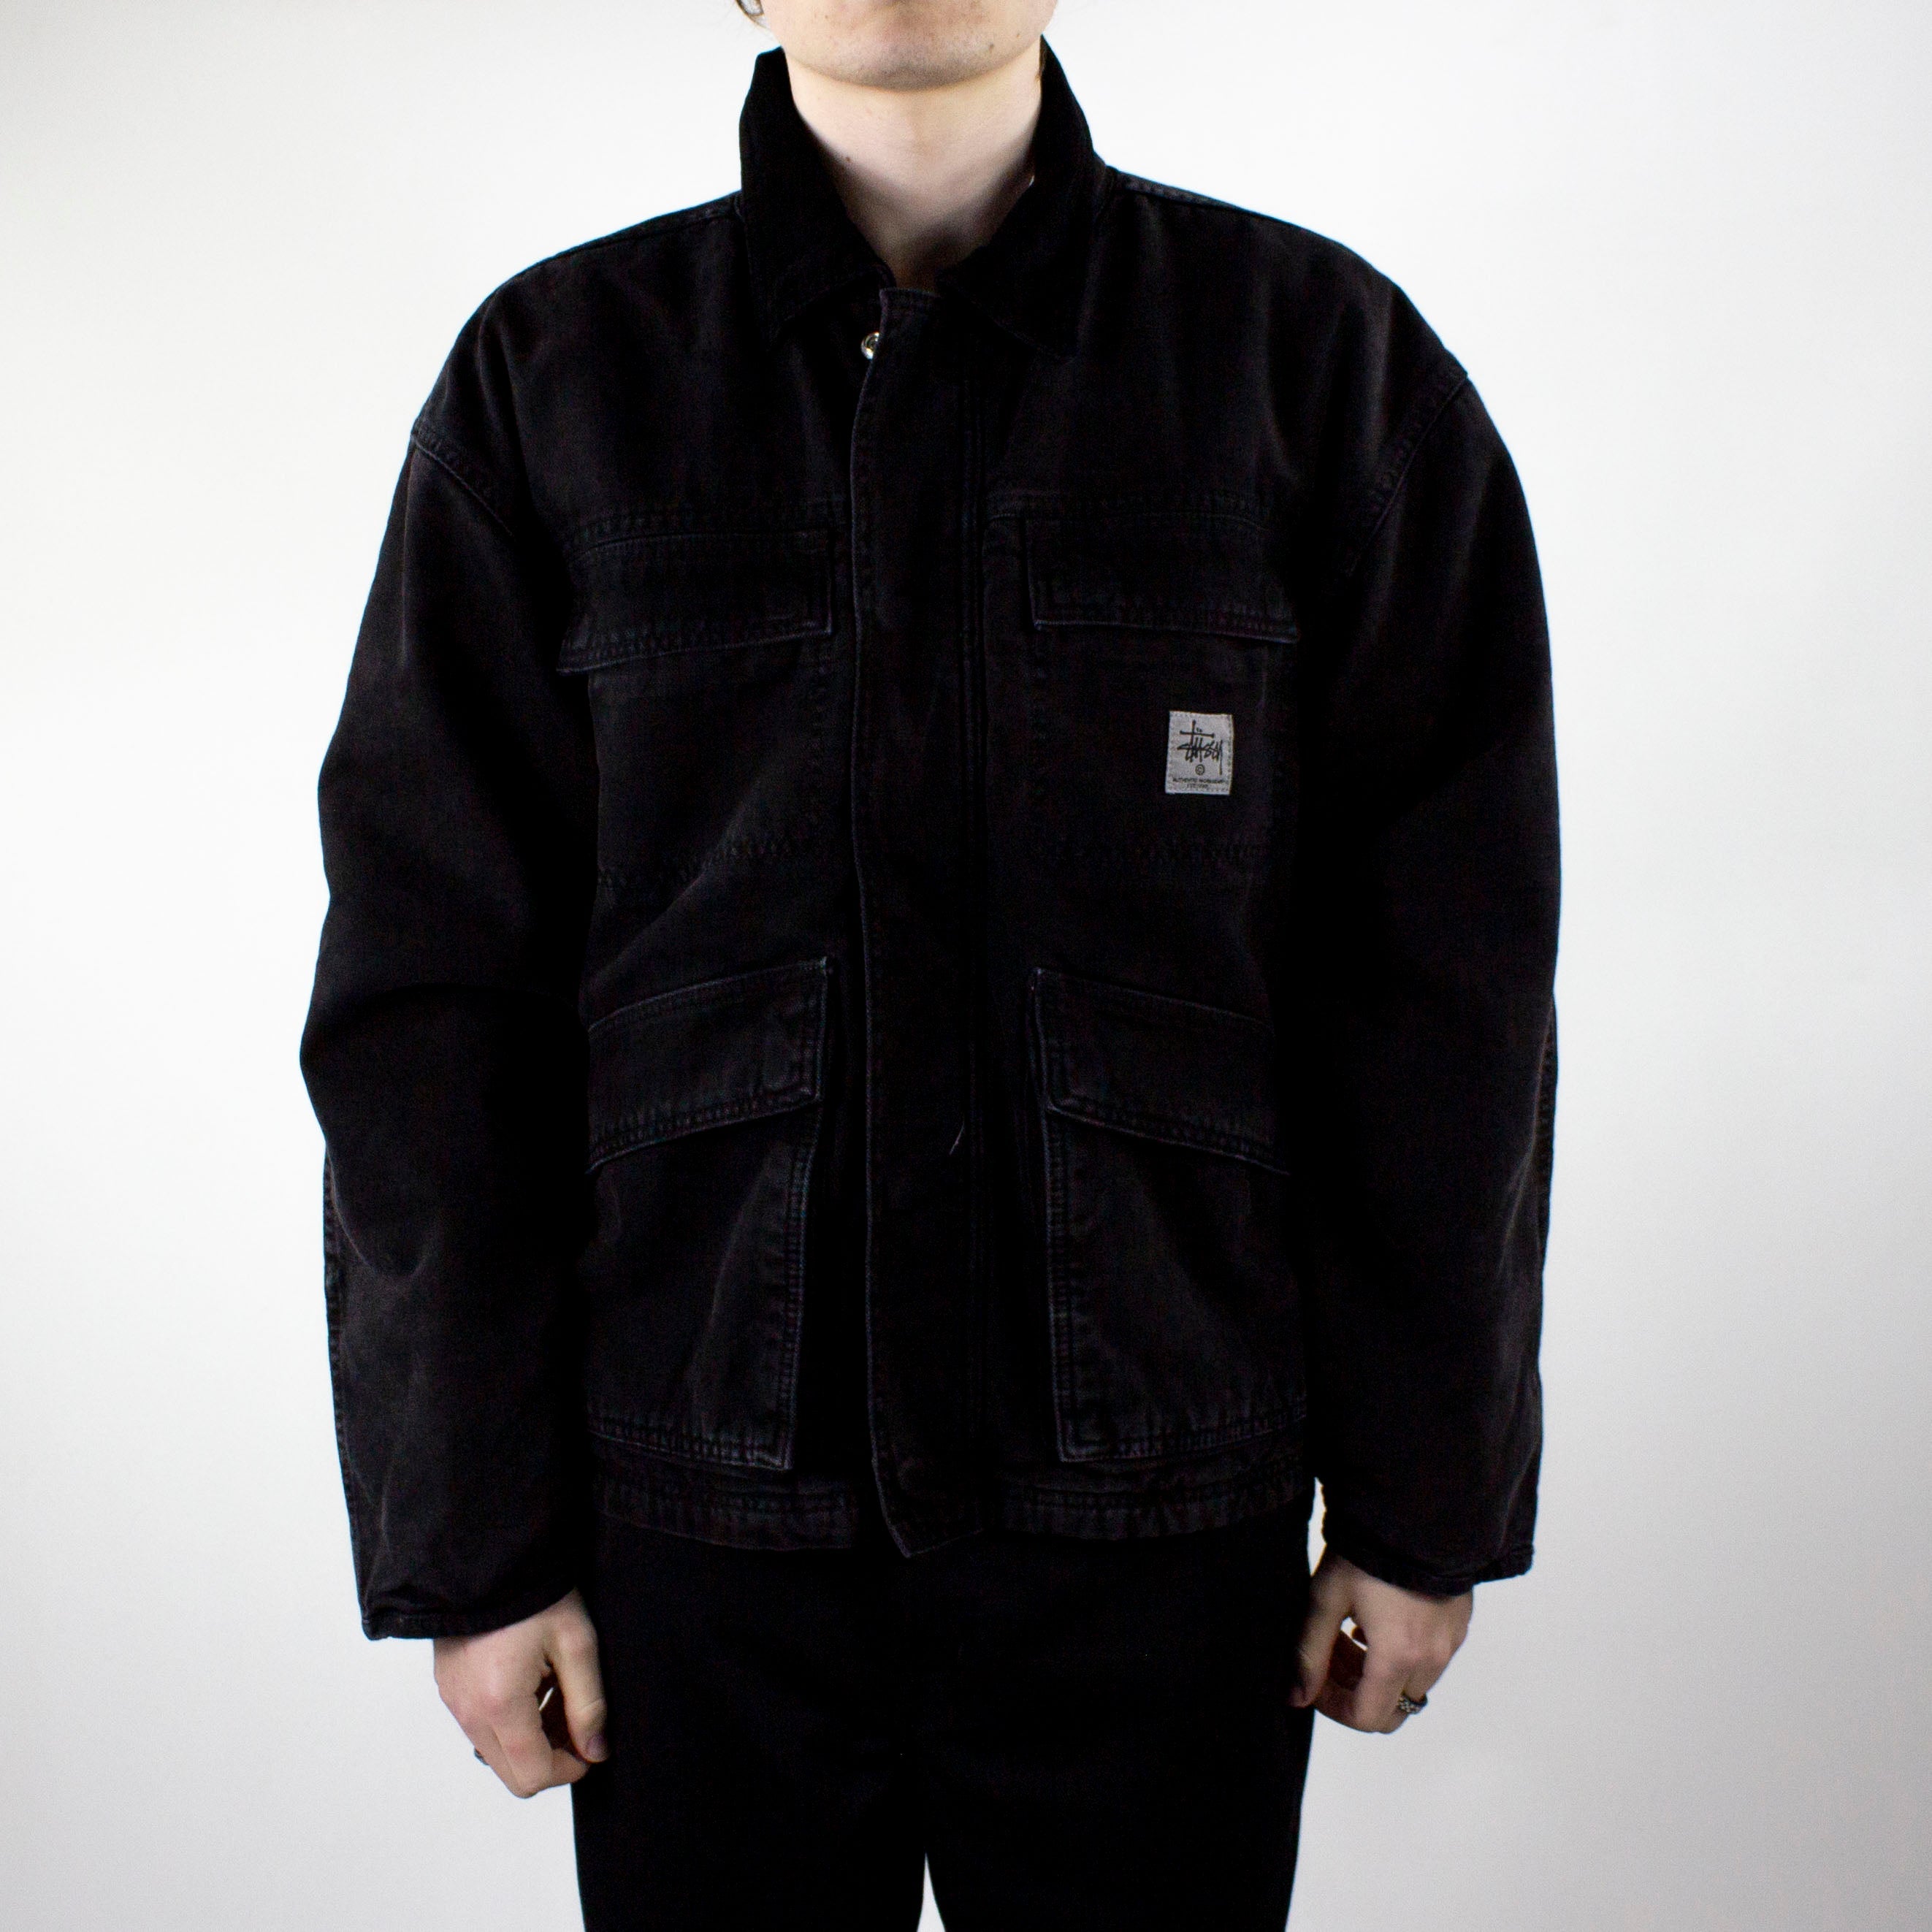 Stussy Washed Canvas Shop Jacket – Black exclusive at Remix